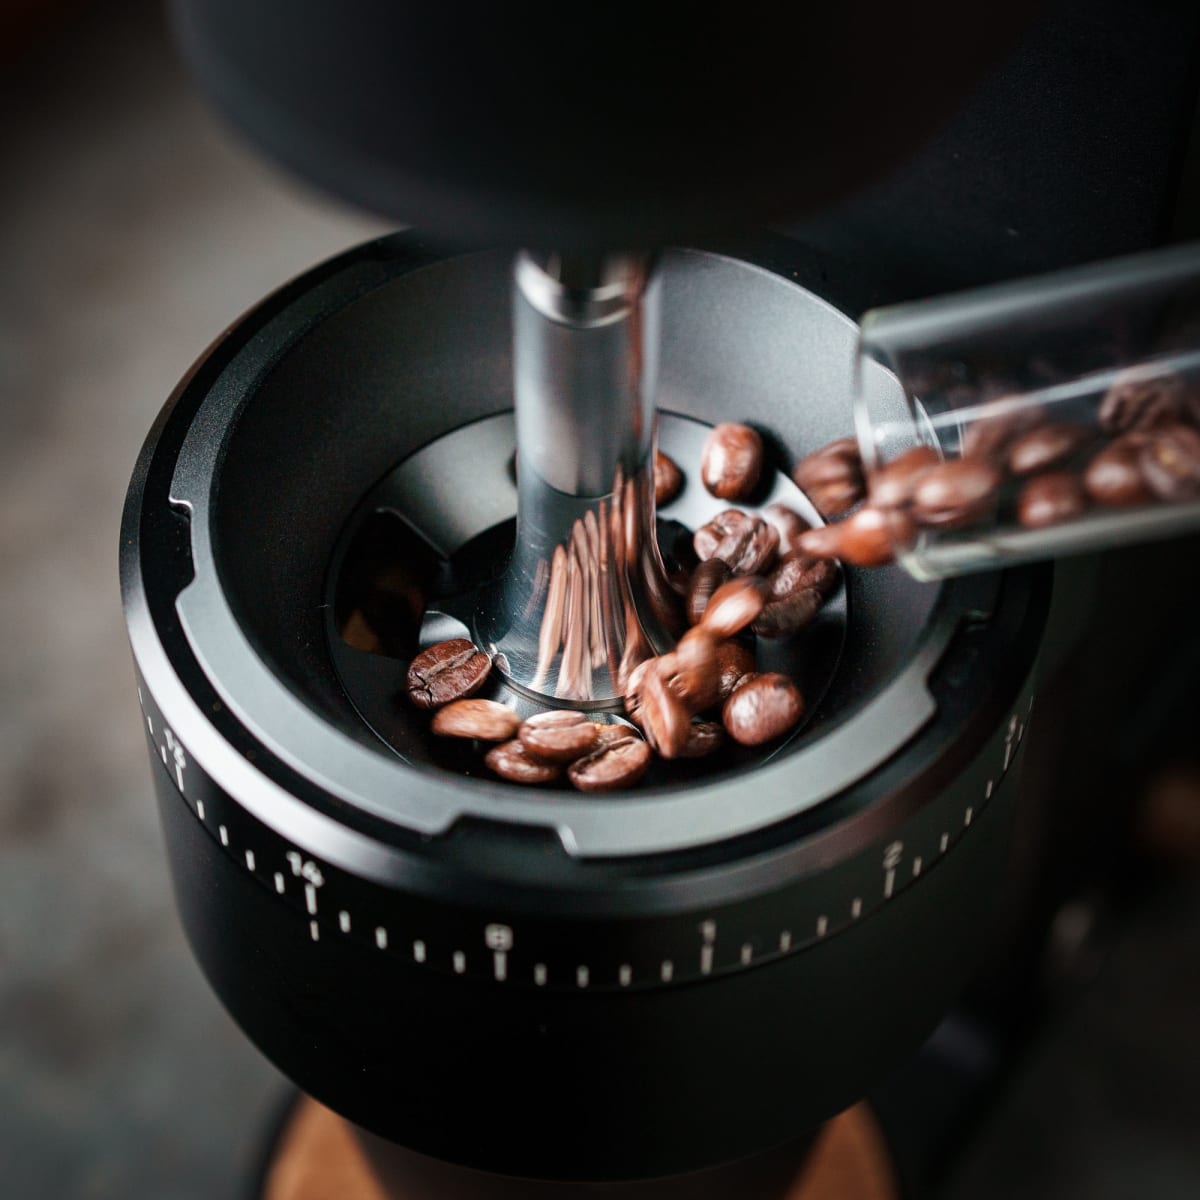 Weber releases its next-generation Key Coffee Grinder - Acquire